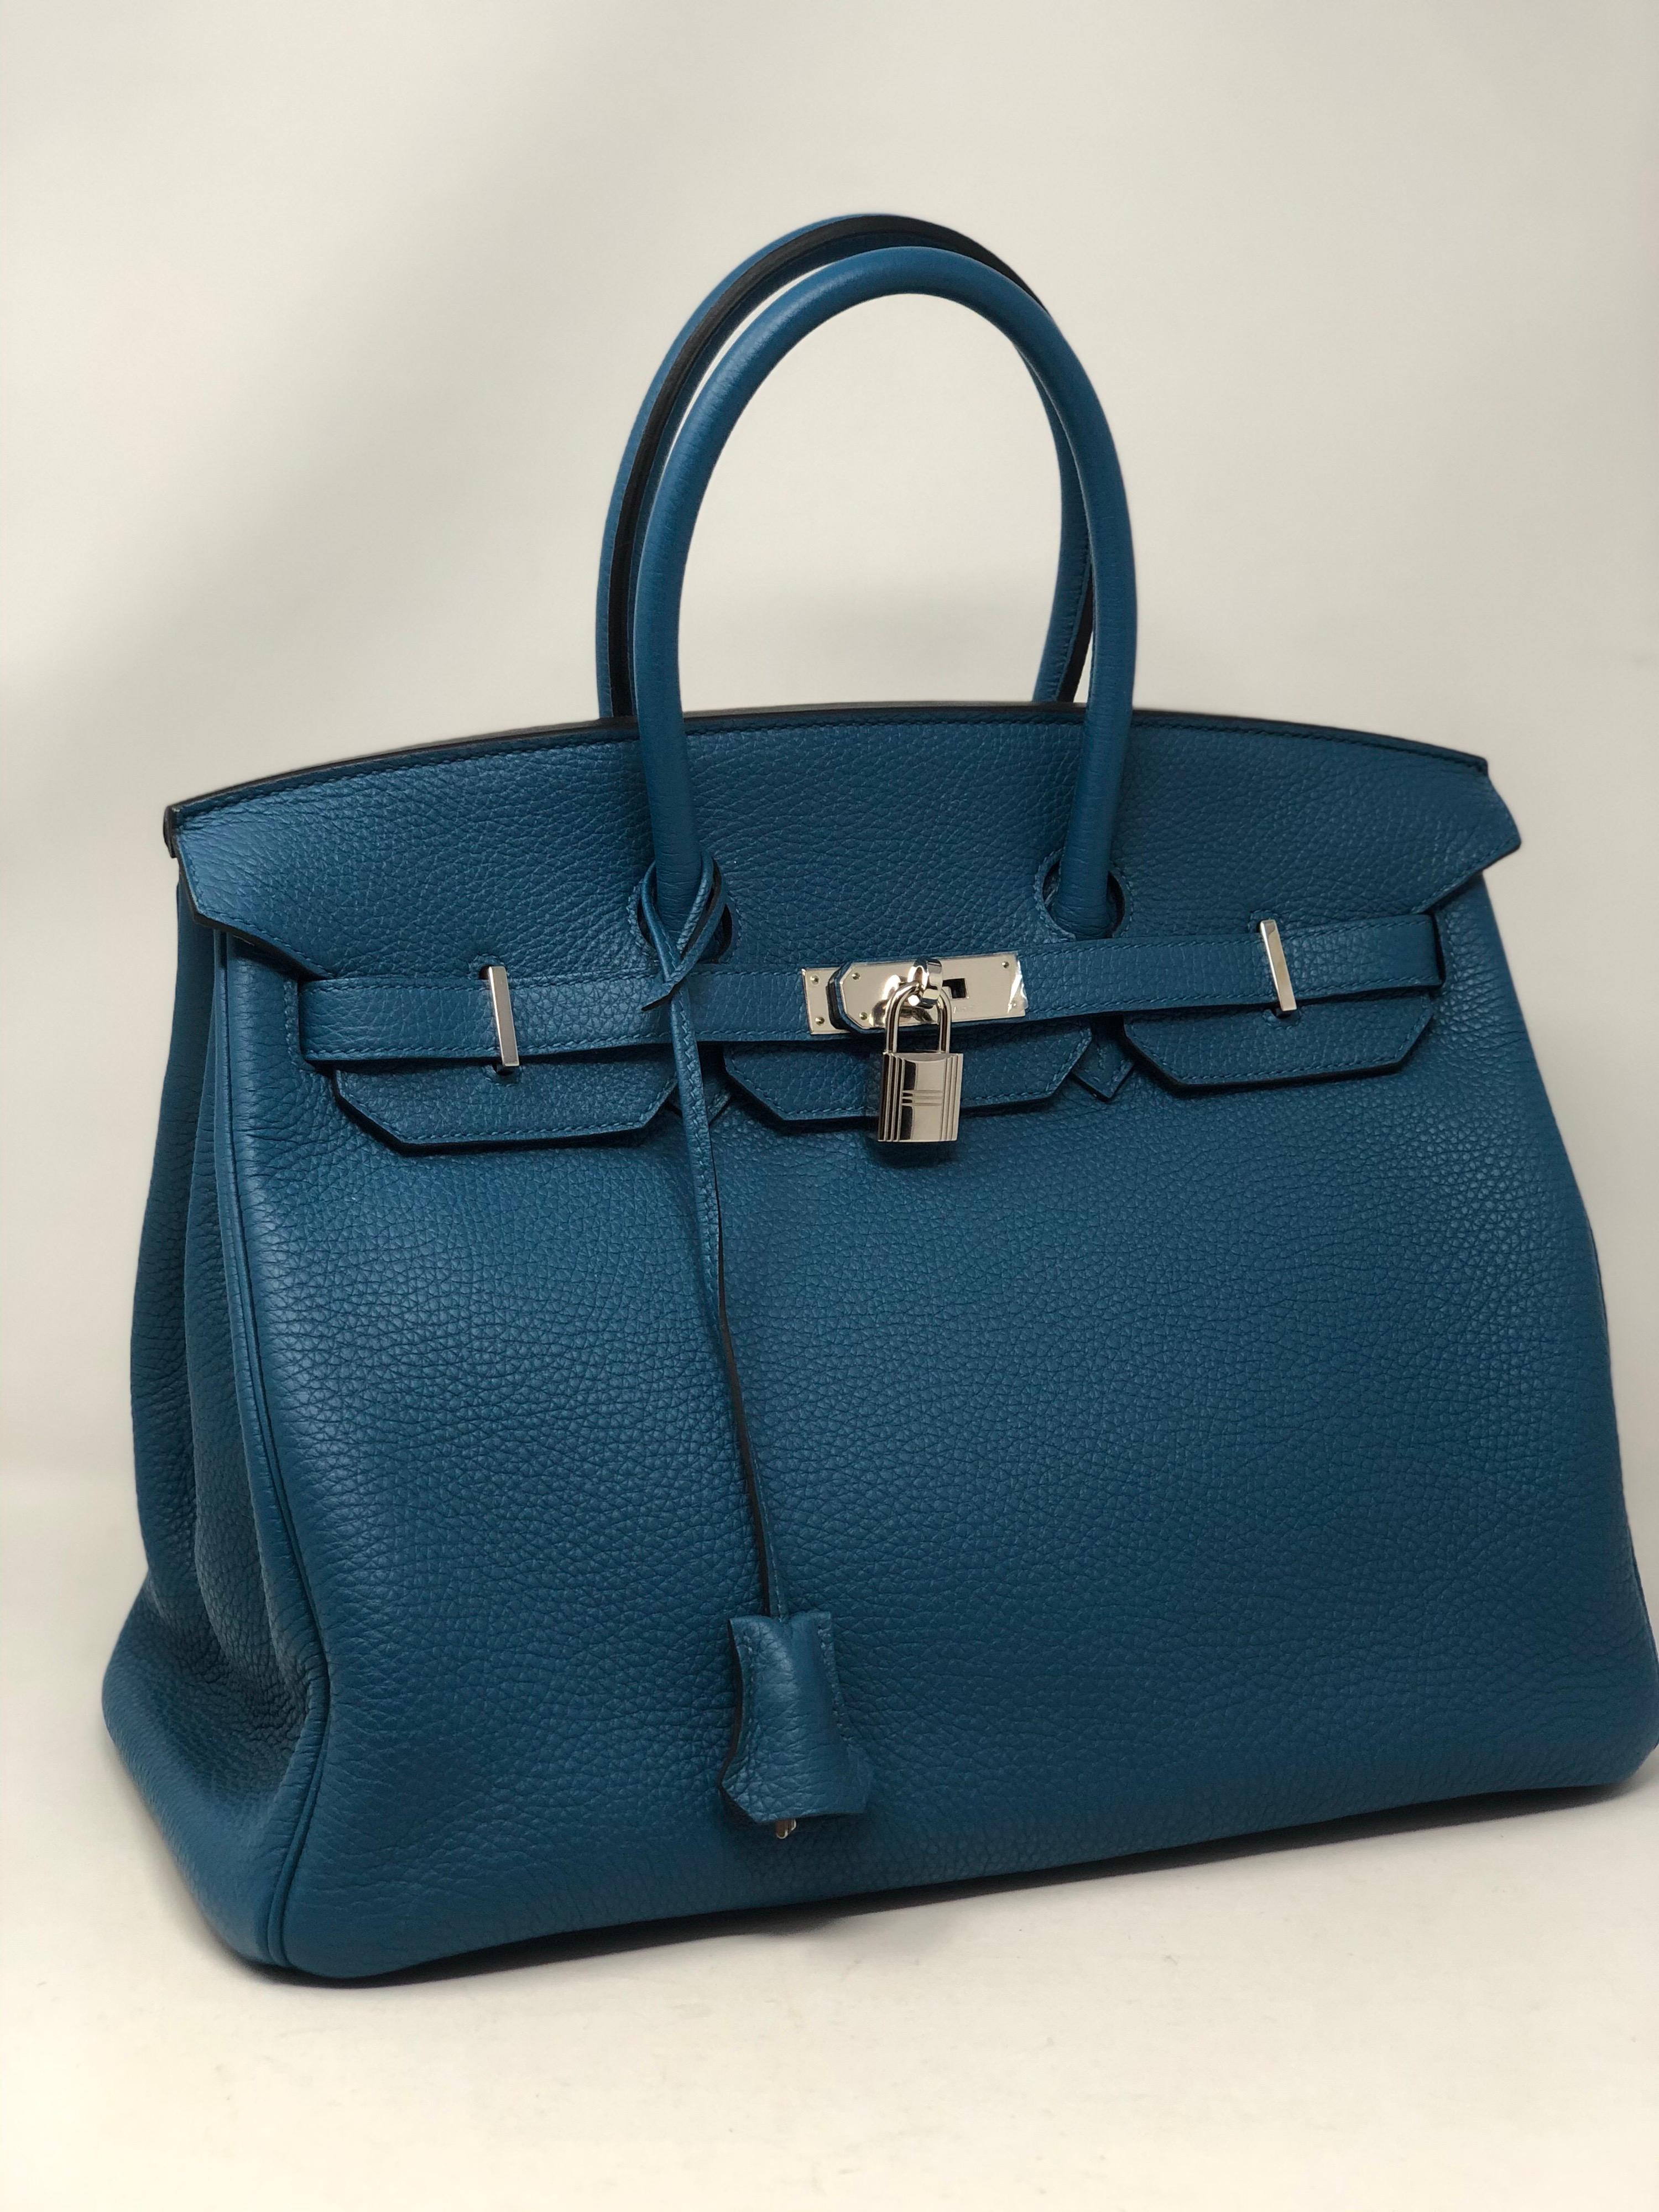 Hermes Birkin 35 Bleu Cobalt Bag. Beautiful blue color with palladium hardware. Excellent condition. P stamp from 2012. Includes clochette, lock, keys, and dust cover. Guaranteed authentic. 